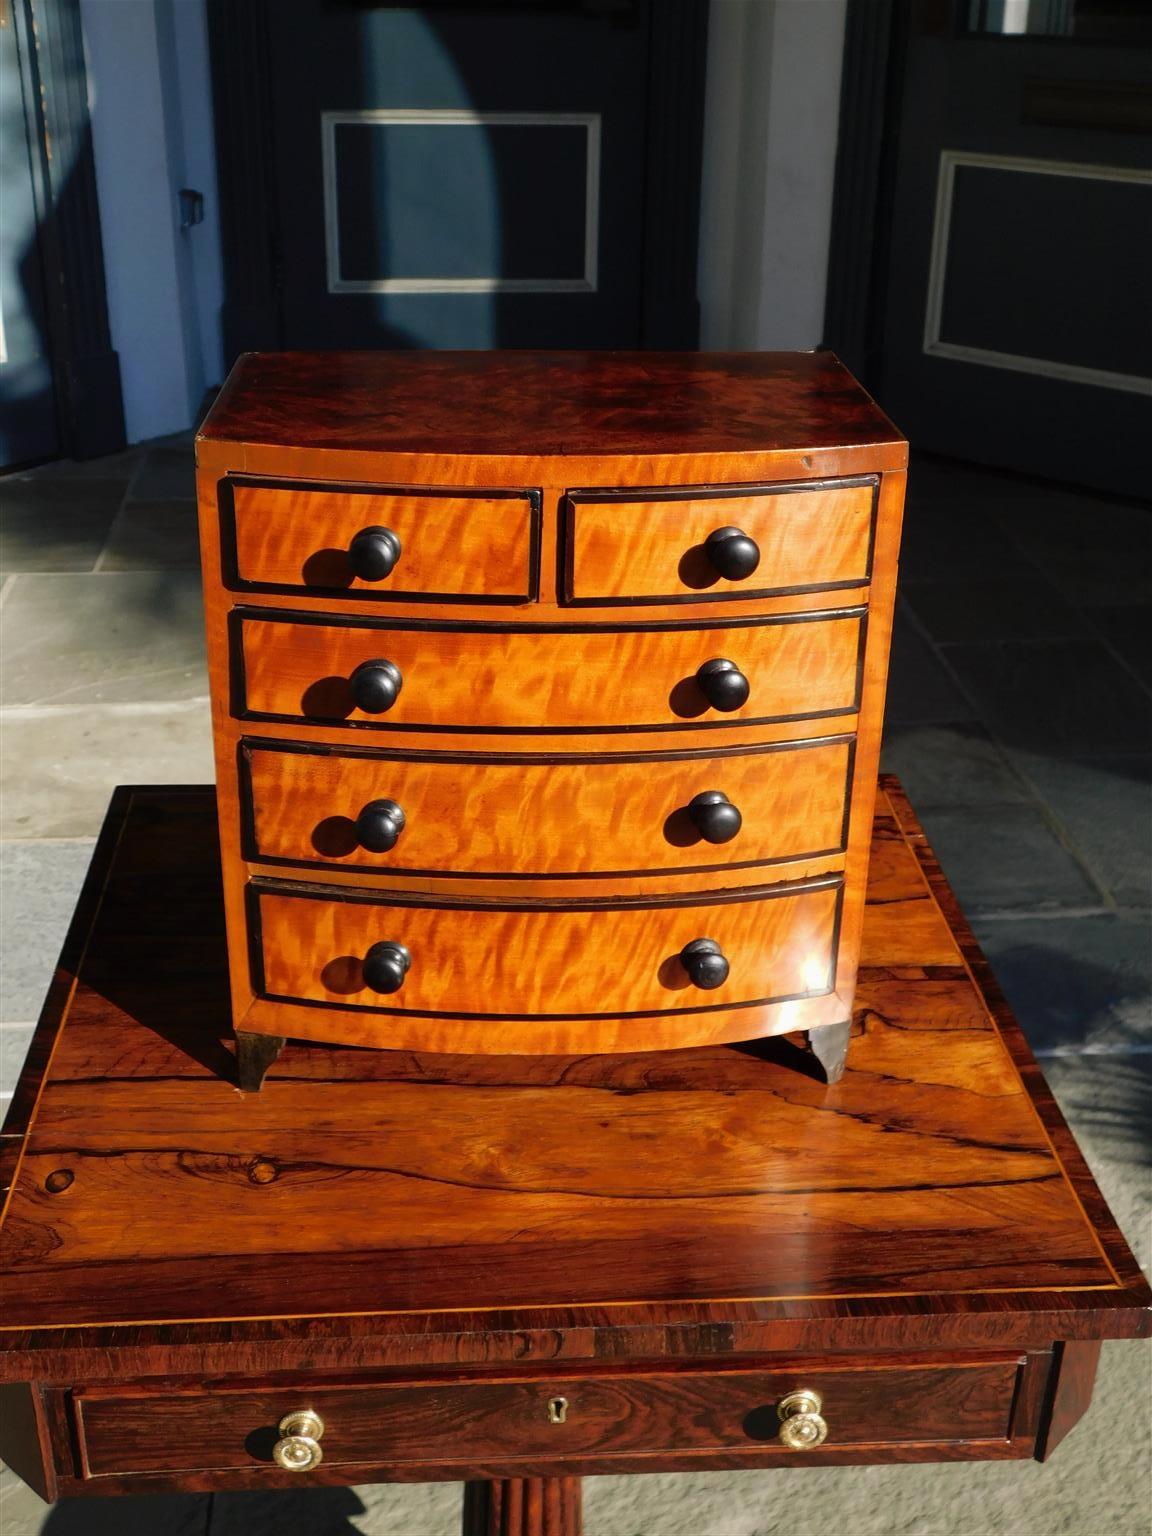 English Regency bow front mahogany and Satinwood ebonized miniature chest with five graduated drawers, ebonized knobs and drawer fronts, and resting on the original bracket feet. Early 19th Century.